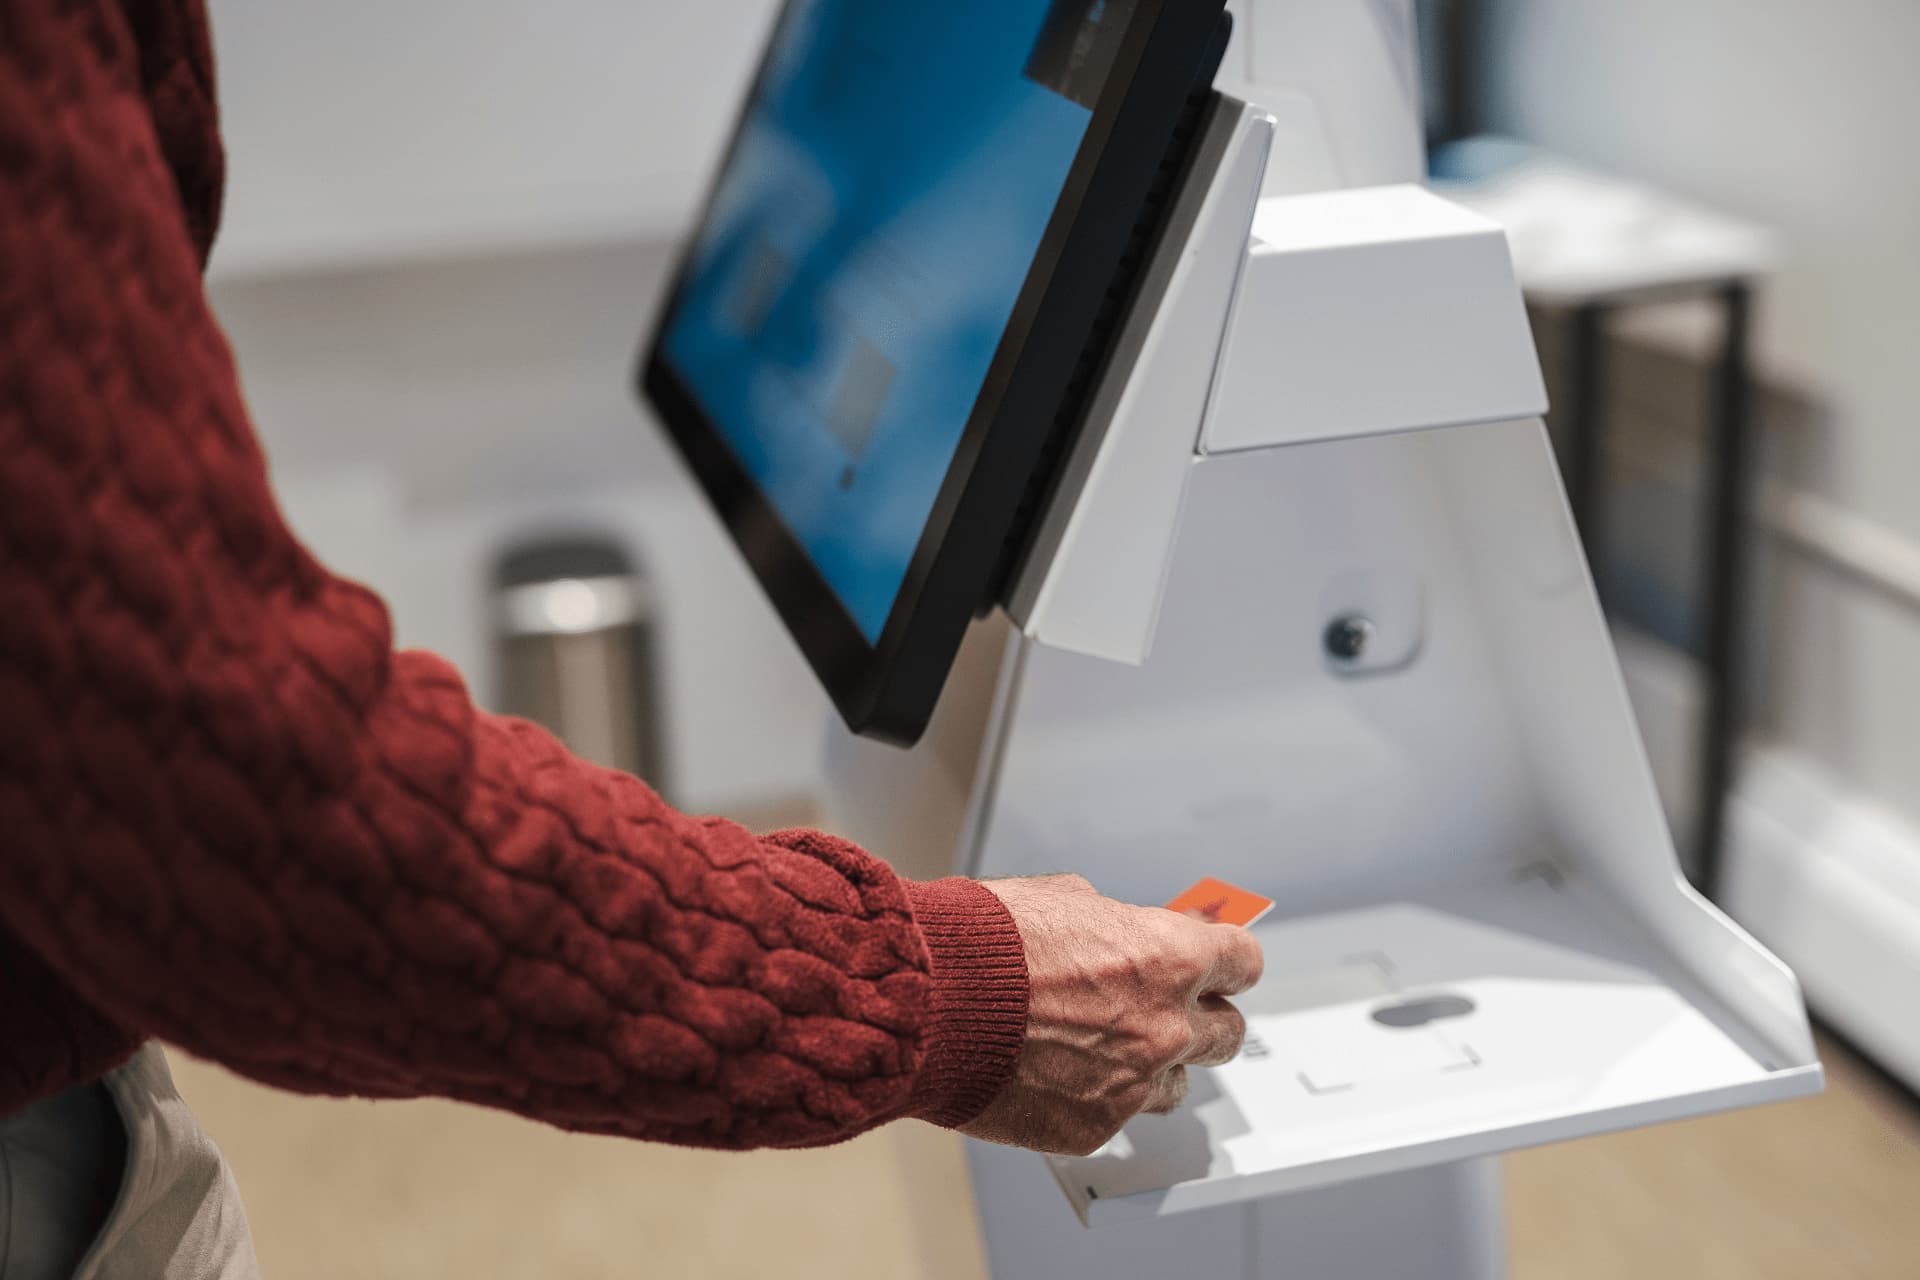 Person using the healthcare kiosk